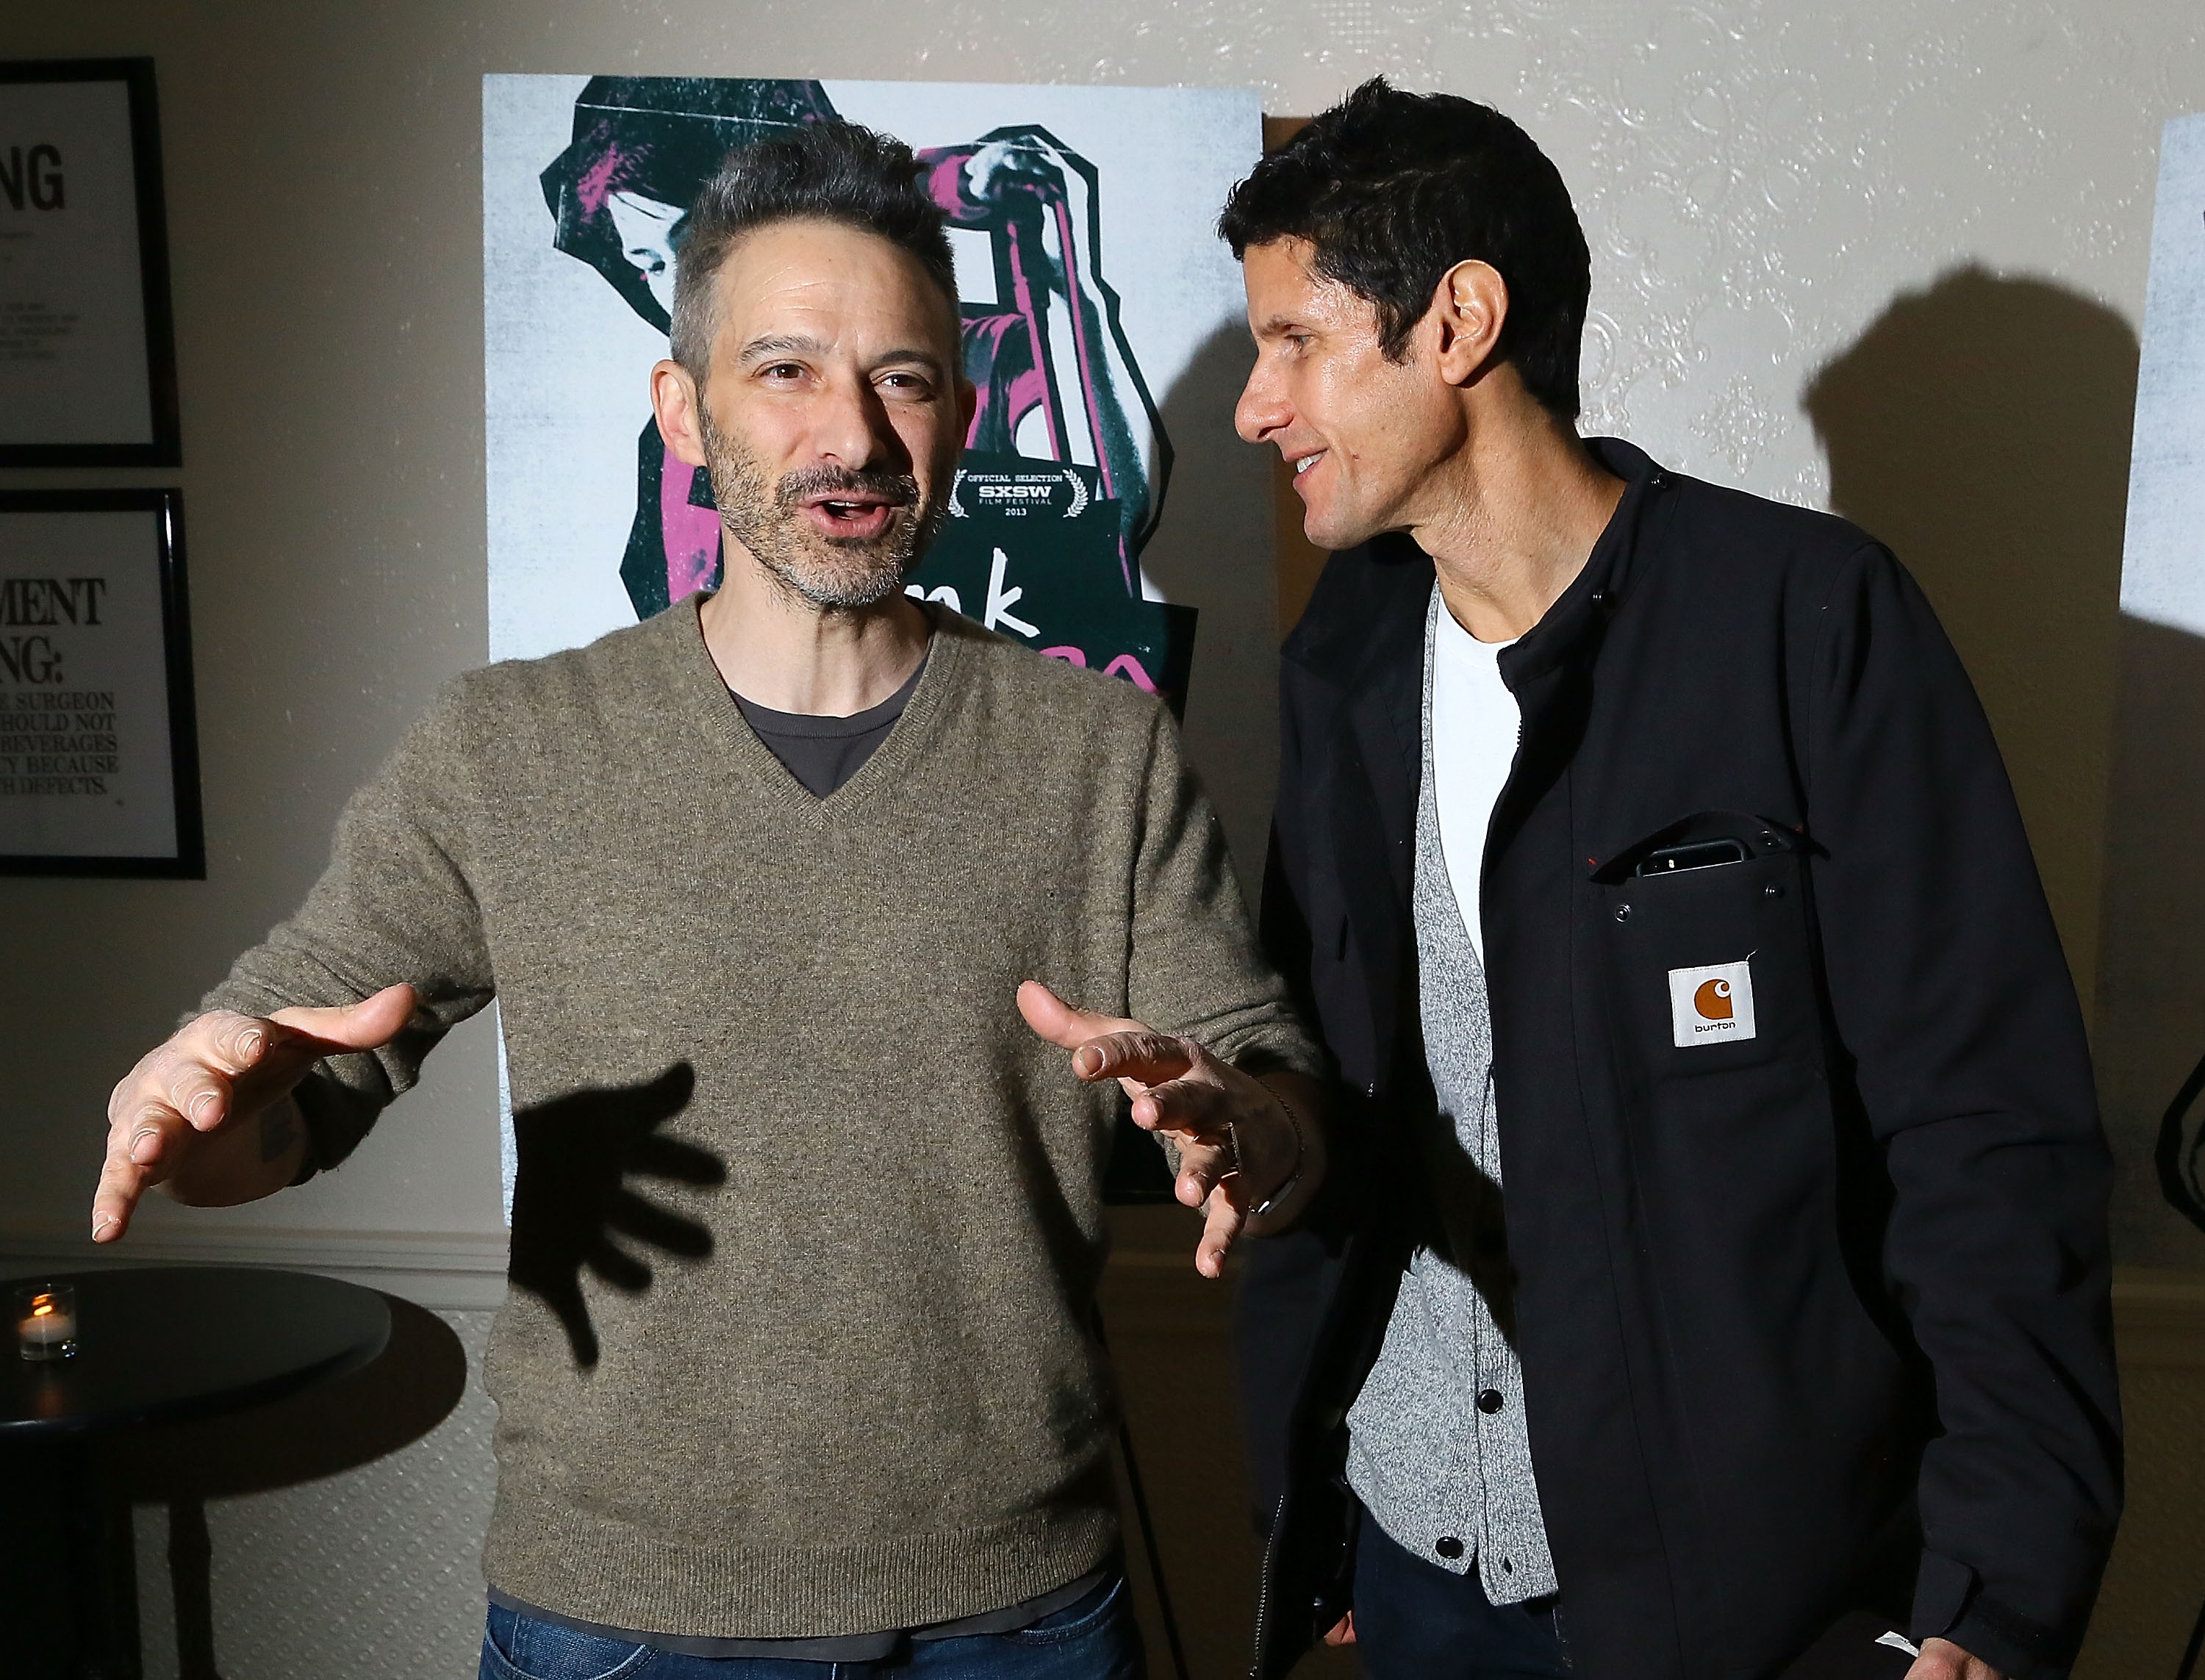 Beastie Boys rappers Adam Horovitz and Michael Diamond attend "The Punk Singer" screening at the Ace Hotel in New York City on Nov. 24, 2013. (Astrid Stawiarz—Getty Images)